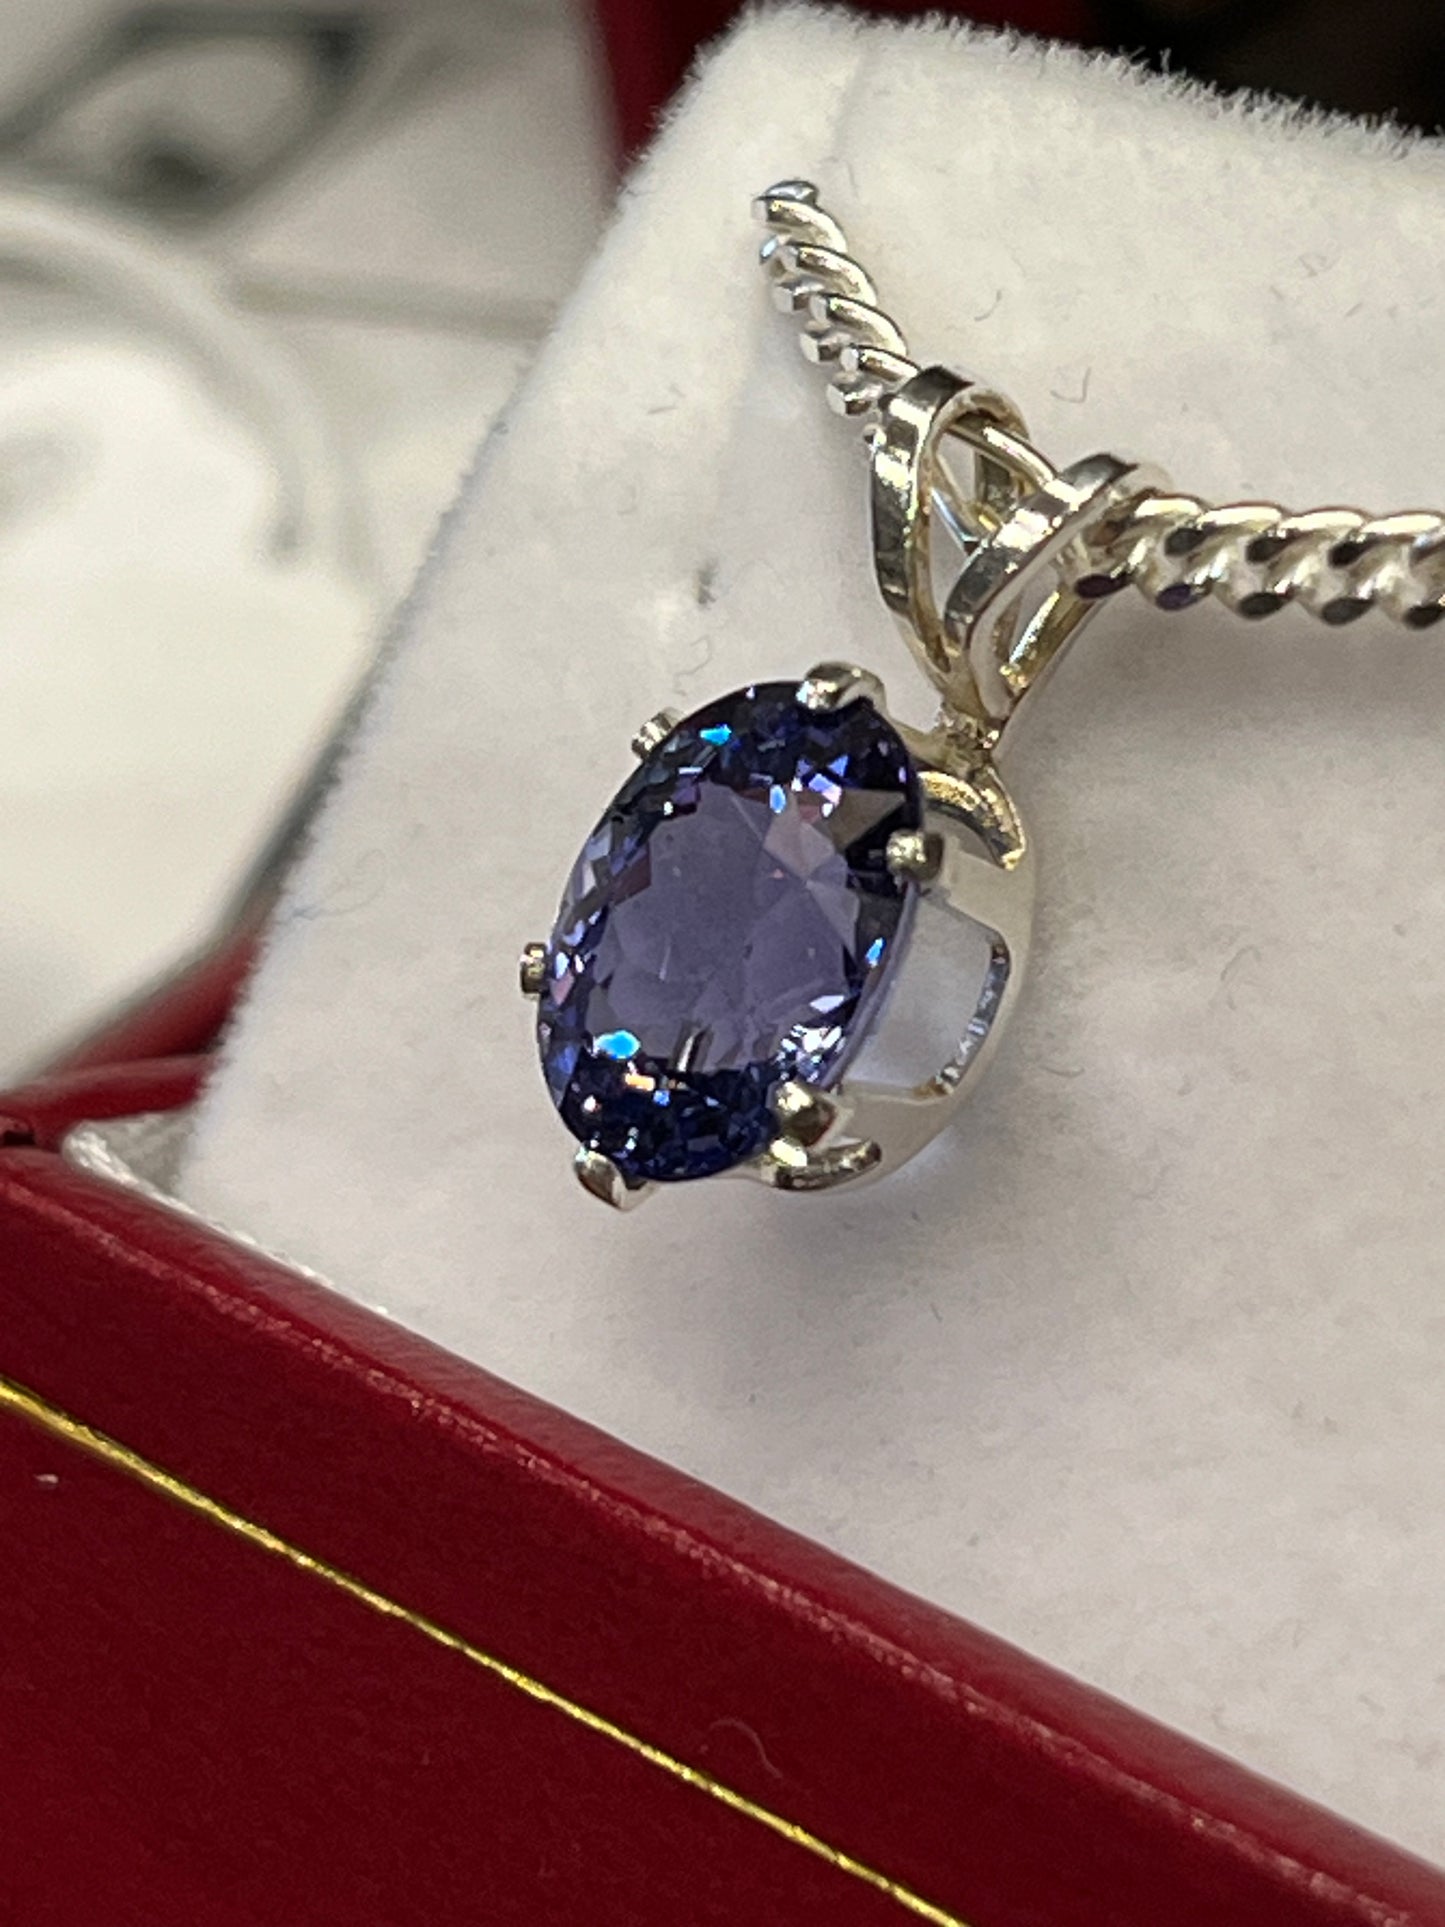 Brilliant 2.49 carat oval Tanzanite pendant in sterling silver on chain. This unique piece of jewelry is authentic Alaska Native art created by an enrolled member of an Alaska Native tribe. 